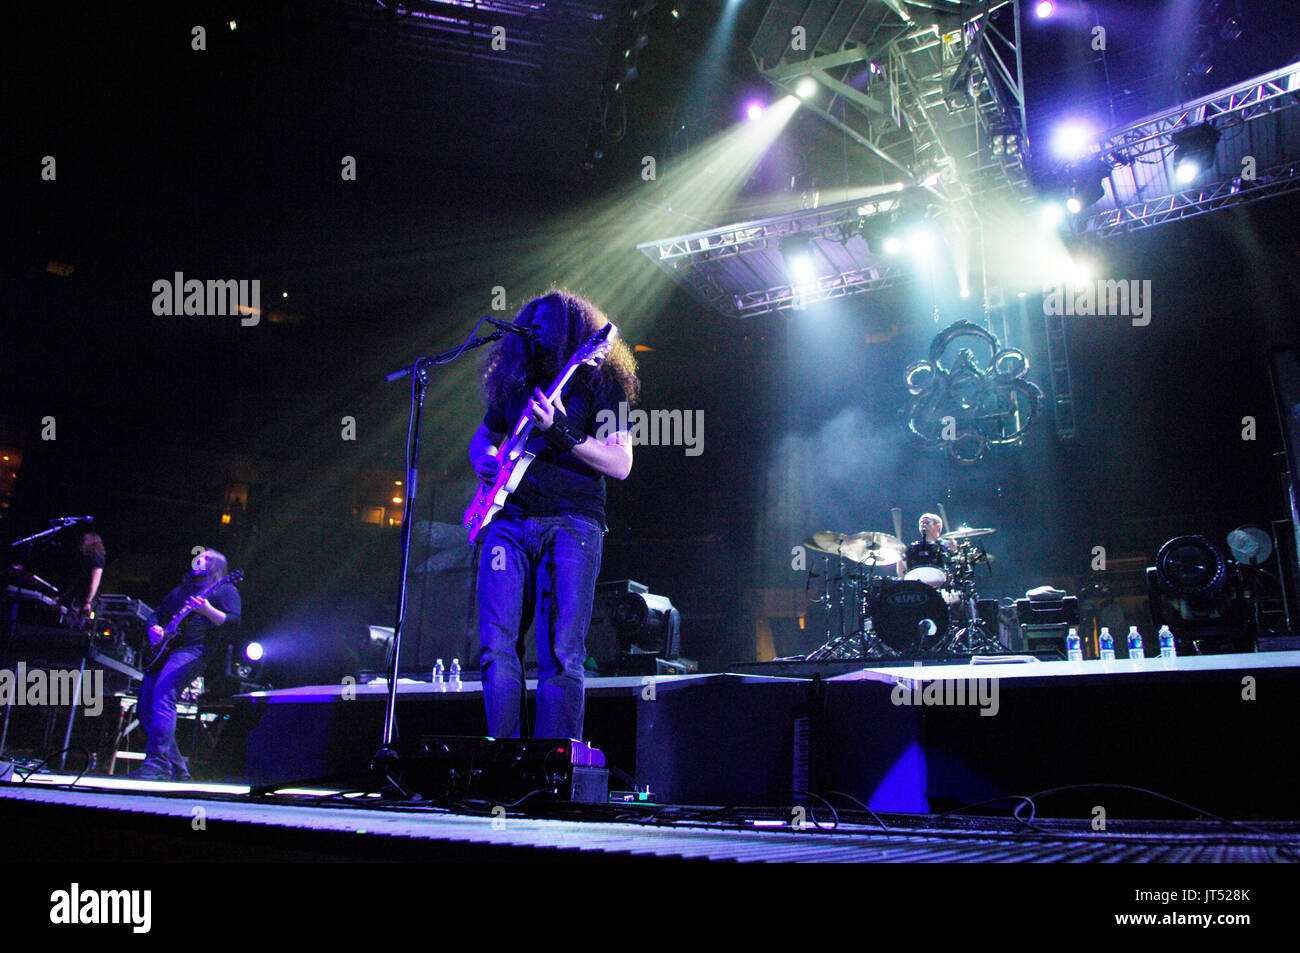 Cambria coheed & performing staples center los angeles, ca. Banque D'Images